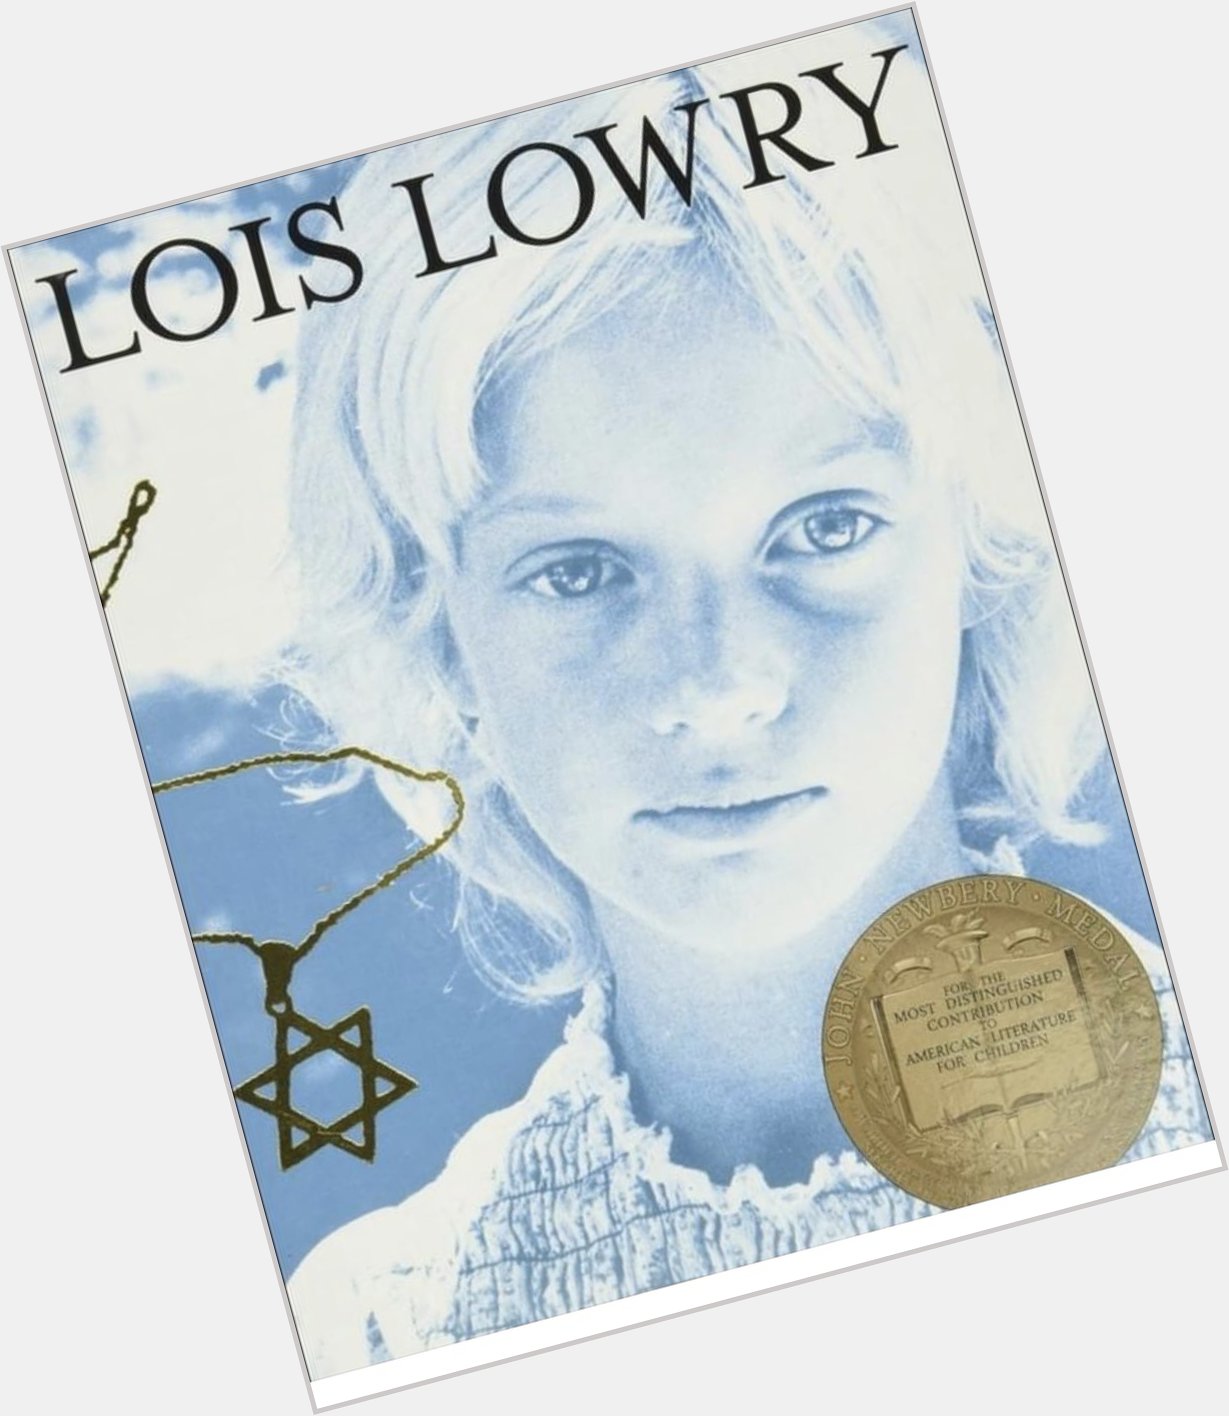 Happy 85th birthday, Lois Lowry! I have Number the Stars , taught many times.   